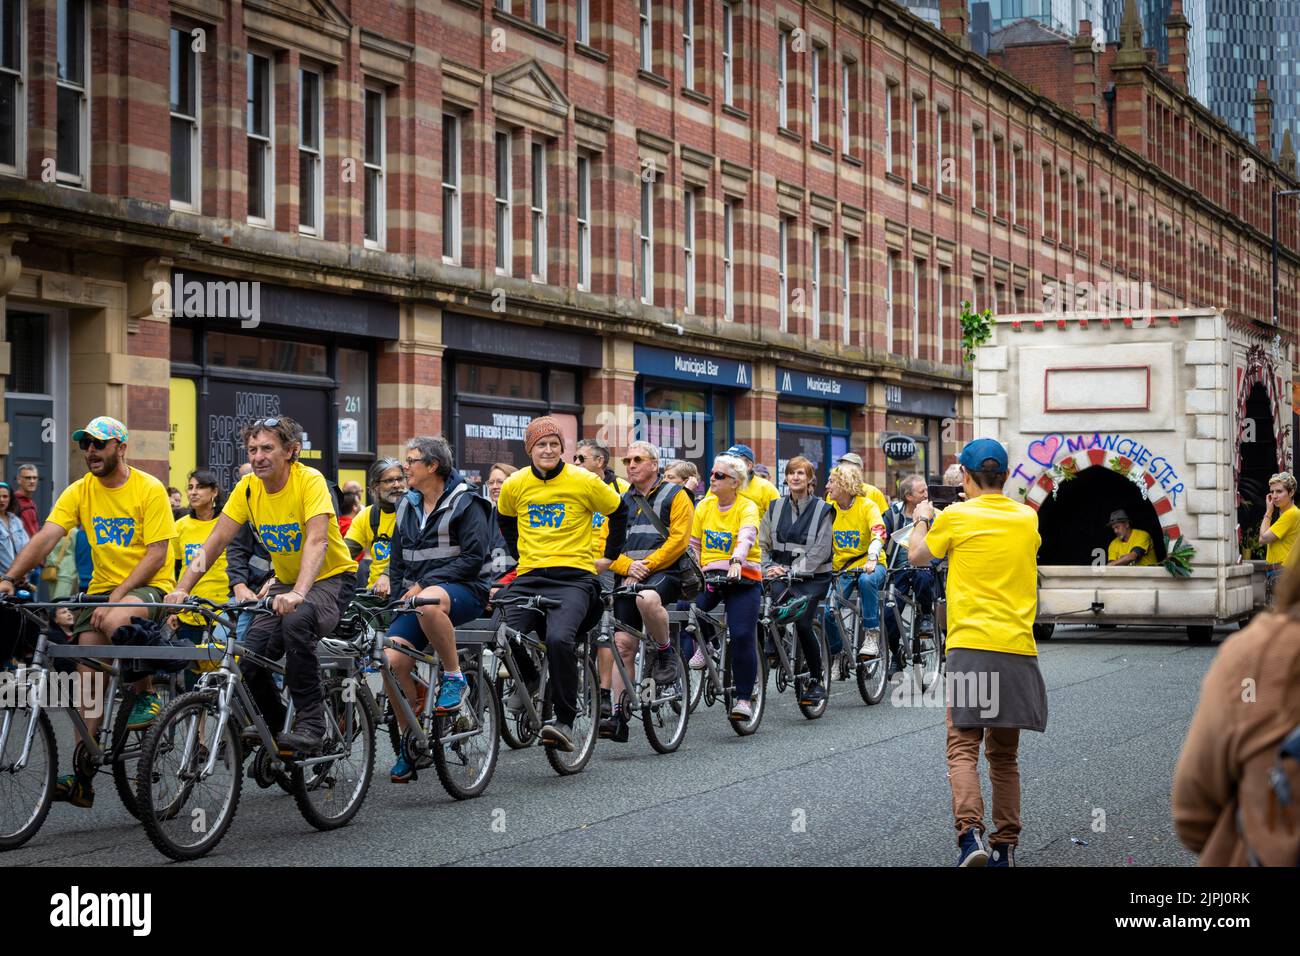 Manchester Day Parade, 19 June 2022: Cyclists & Bicycles Stock Photo